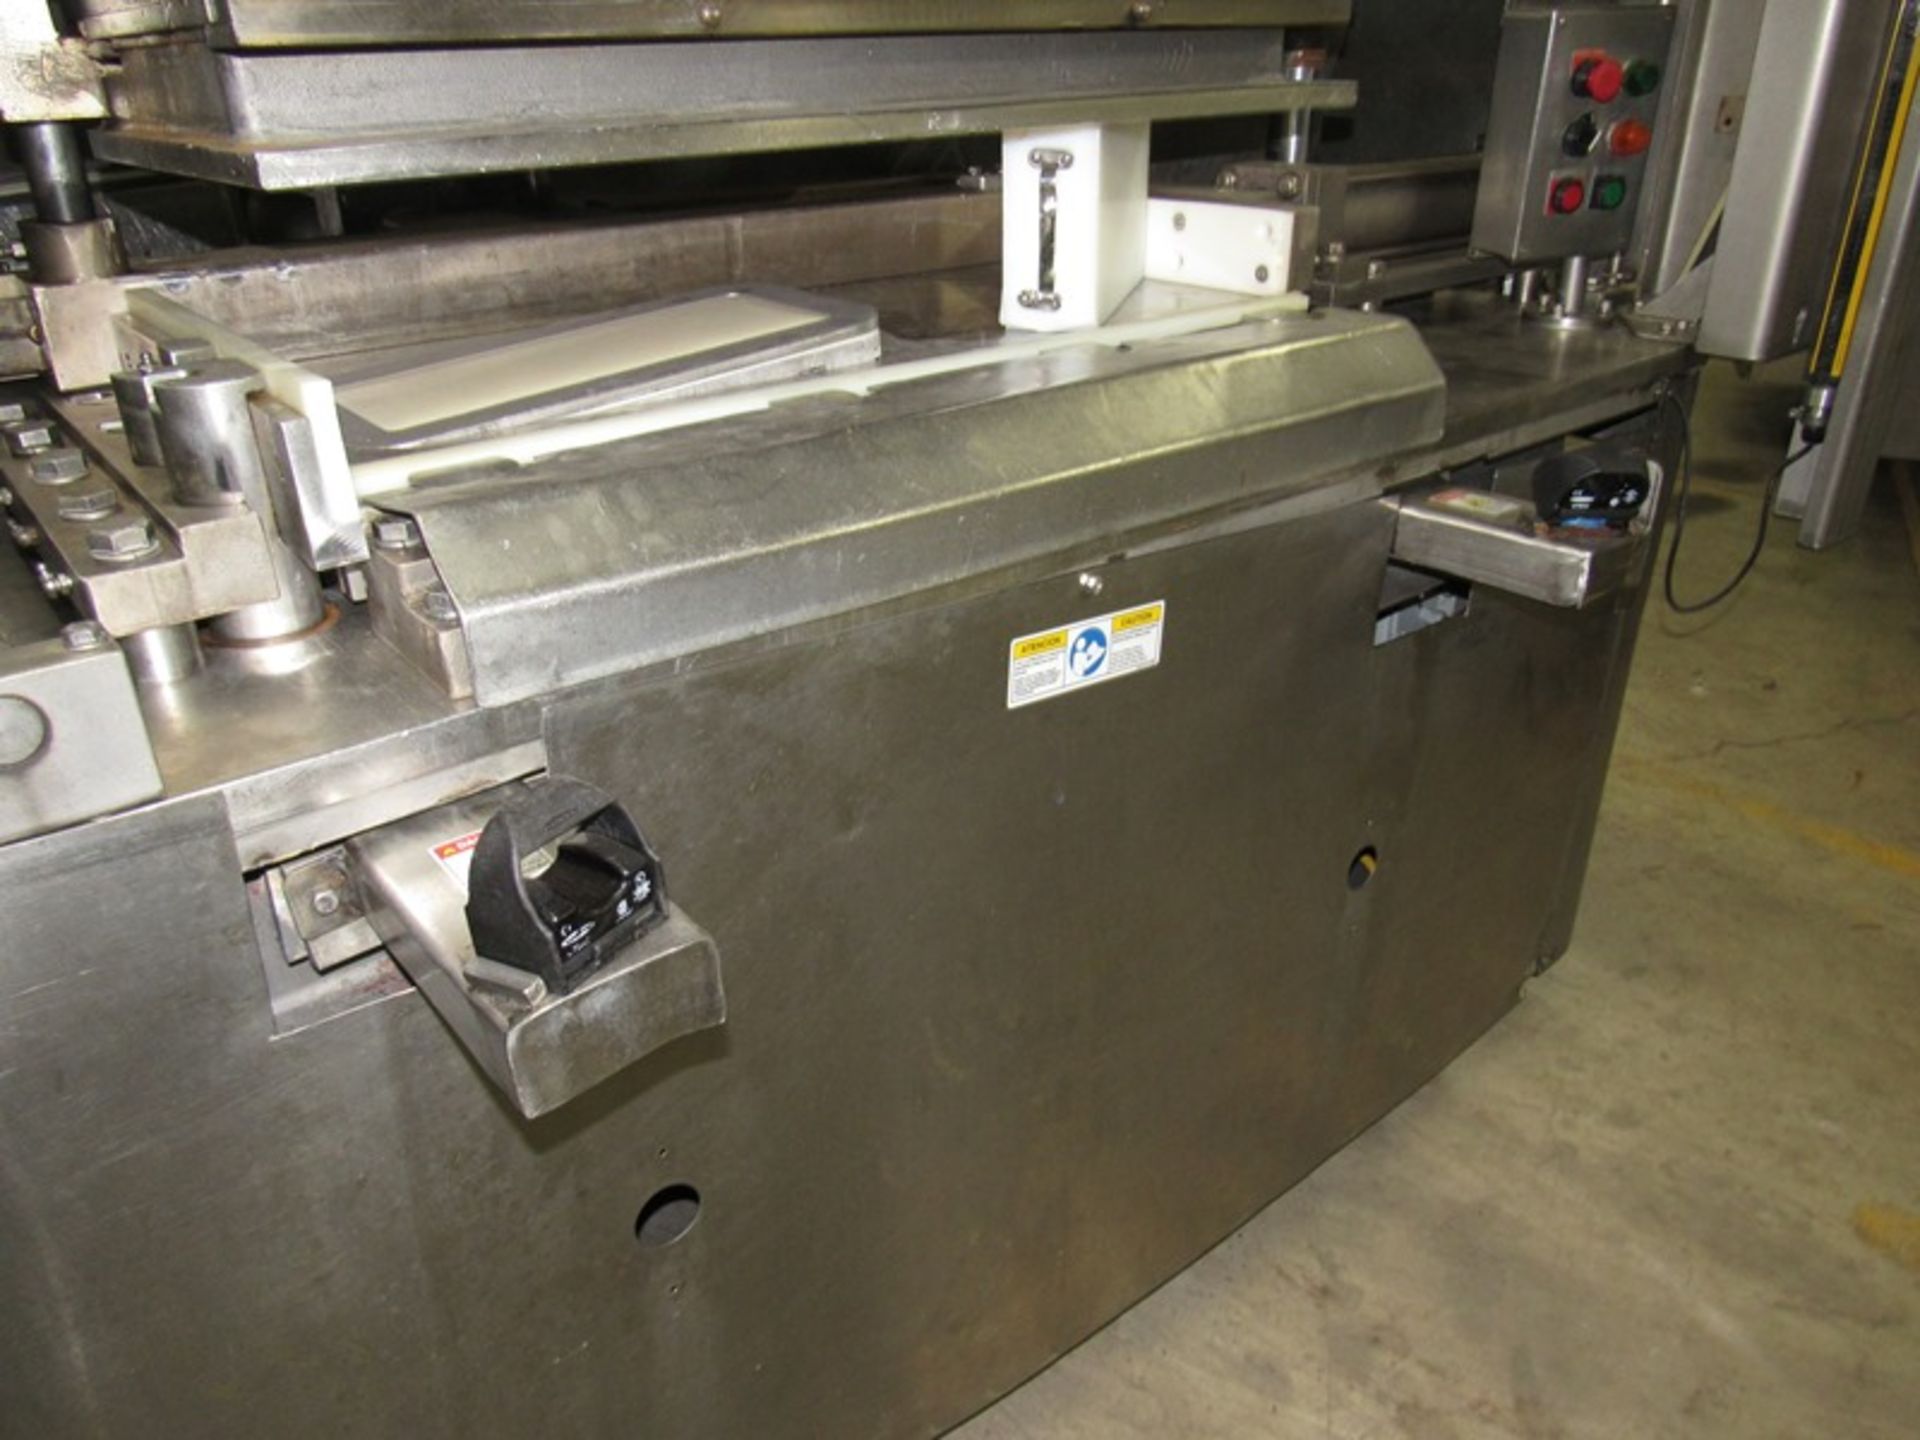 Anco Mdl. 1411 Bacon Press designed to press uniform thickness and width to maximize slicing yields, - Image 5 of 16